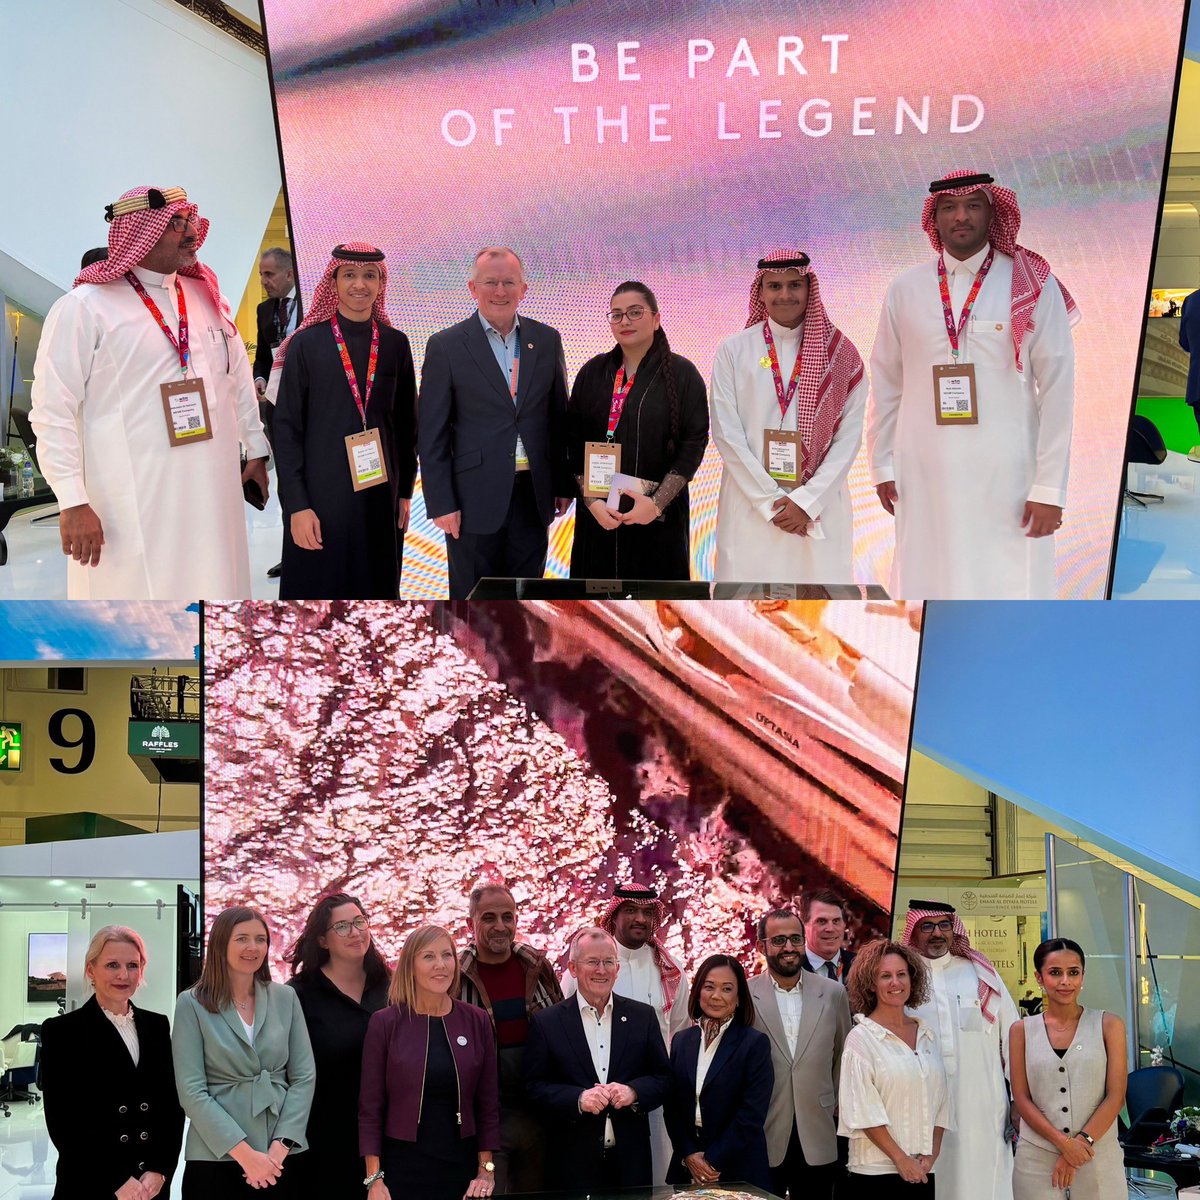 Many thanks to my wonderful colleagues at NEOM Tourism and our partners for all their support at World Travel Market in London this week. I’m fortunate to have the support of such a great team. #NEOM